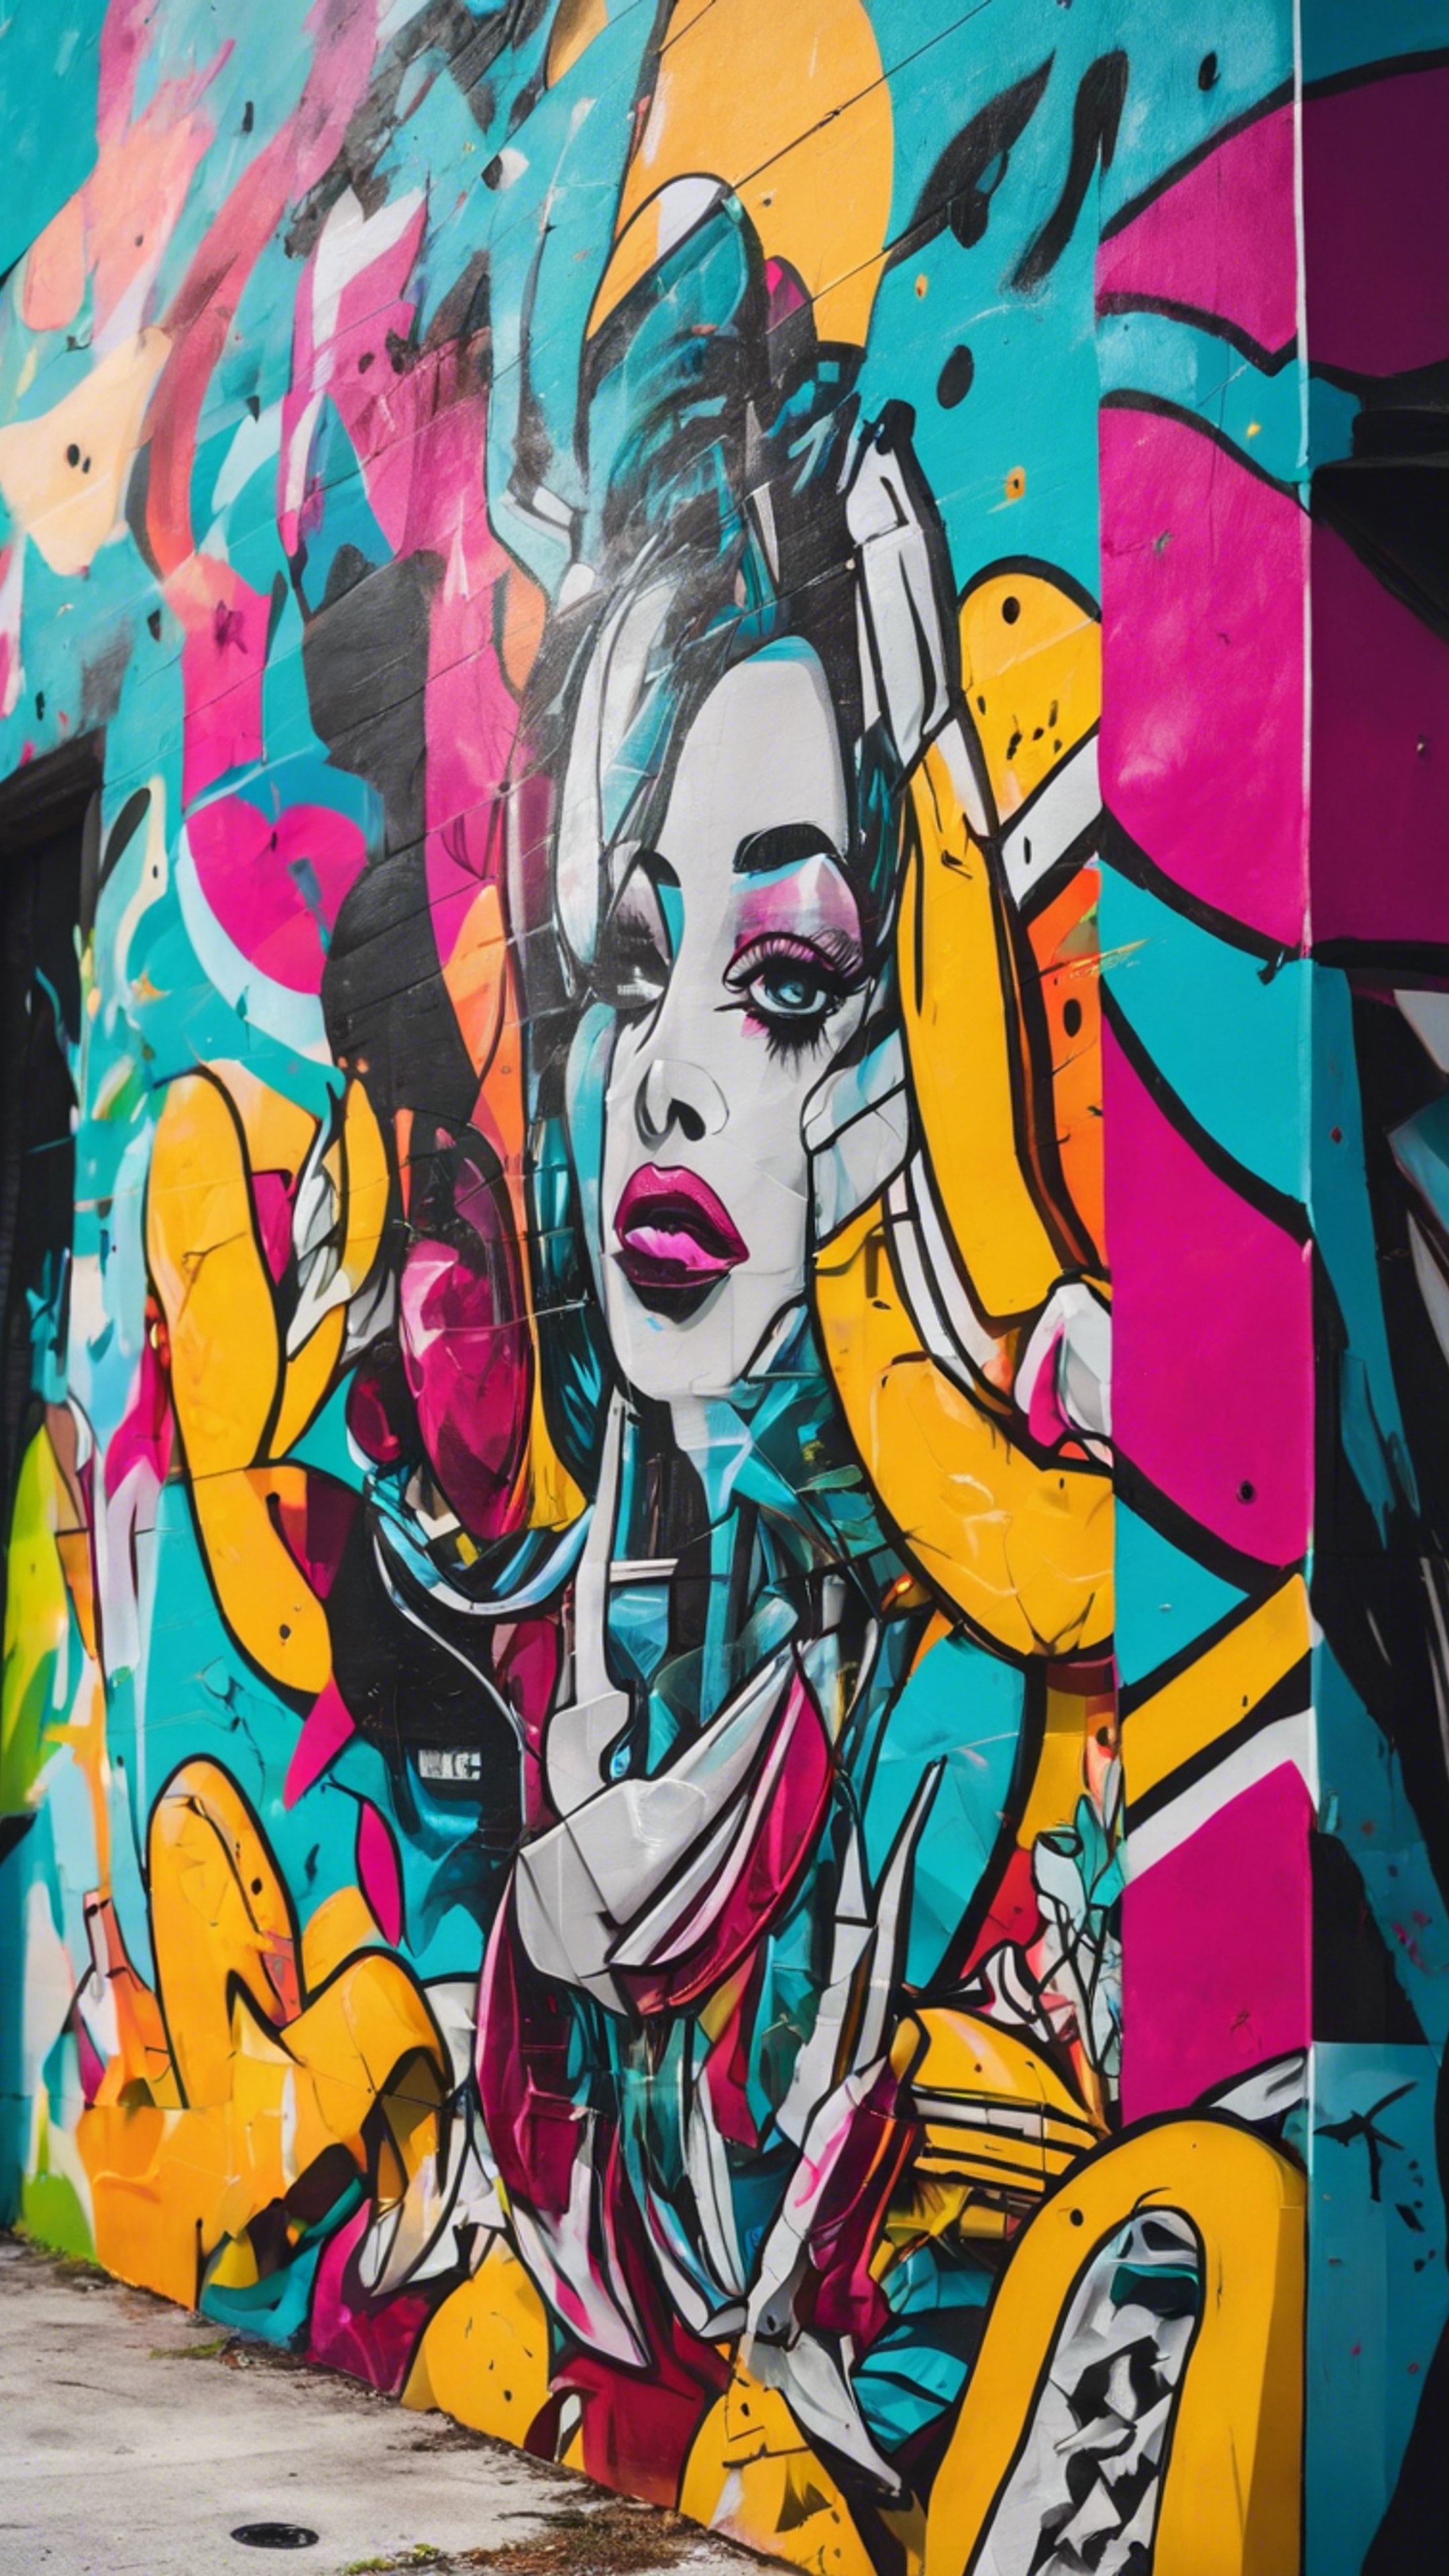 A vibrant street art mural in Wynwood, Miami, featuring abstract art and bright colors. Tapet[fc74442468964623923a]